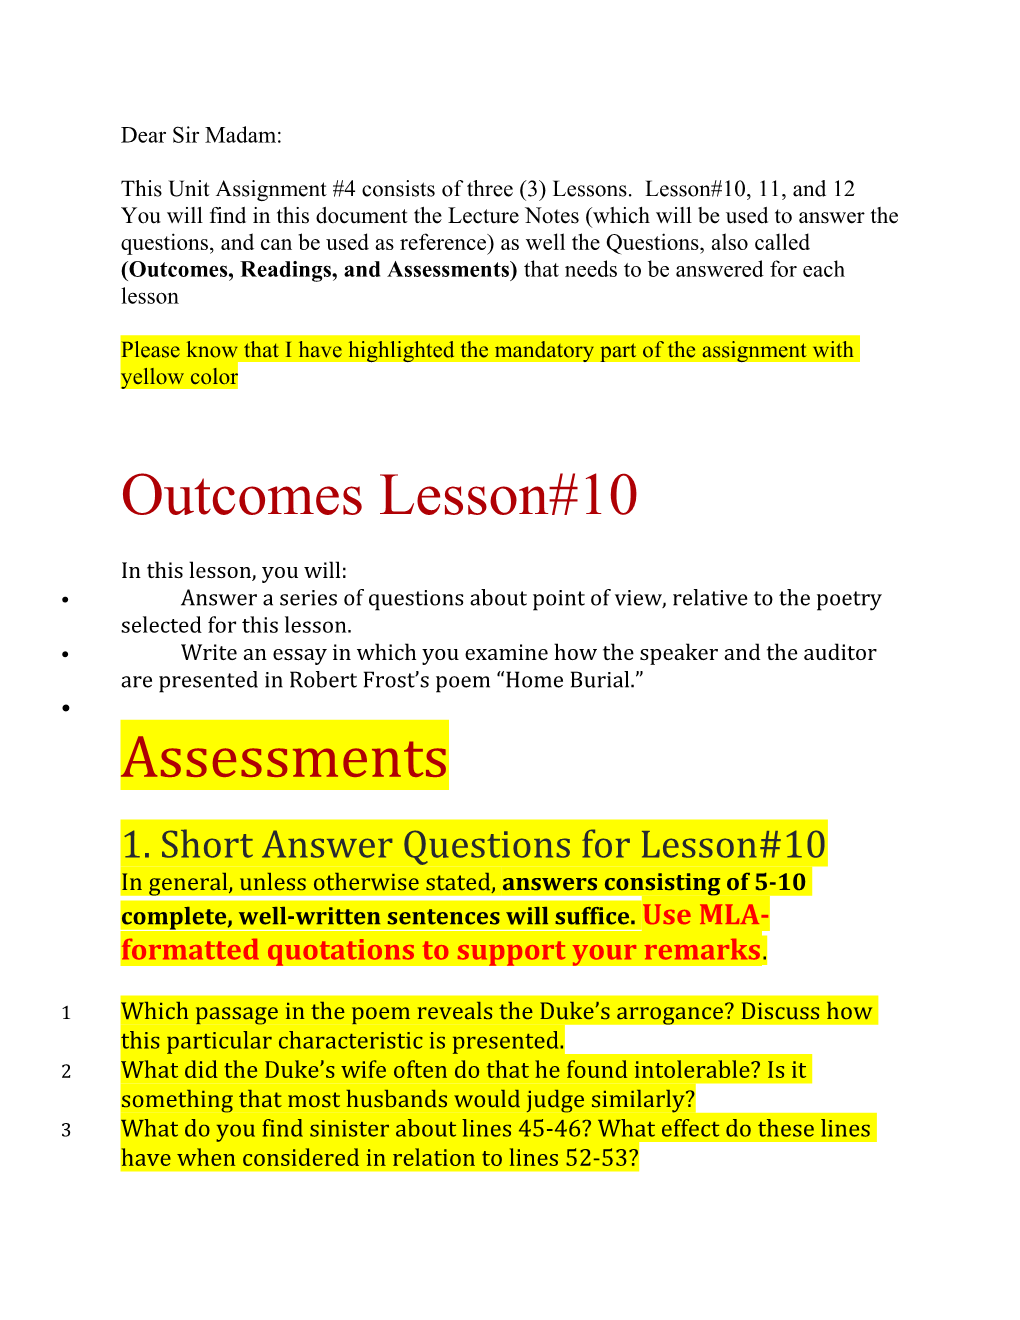 This Unit Assignment #4 Consists of Three (3) Lessons. Lesson#10, 11, and 12